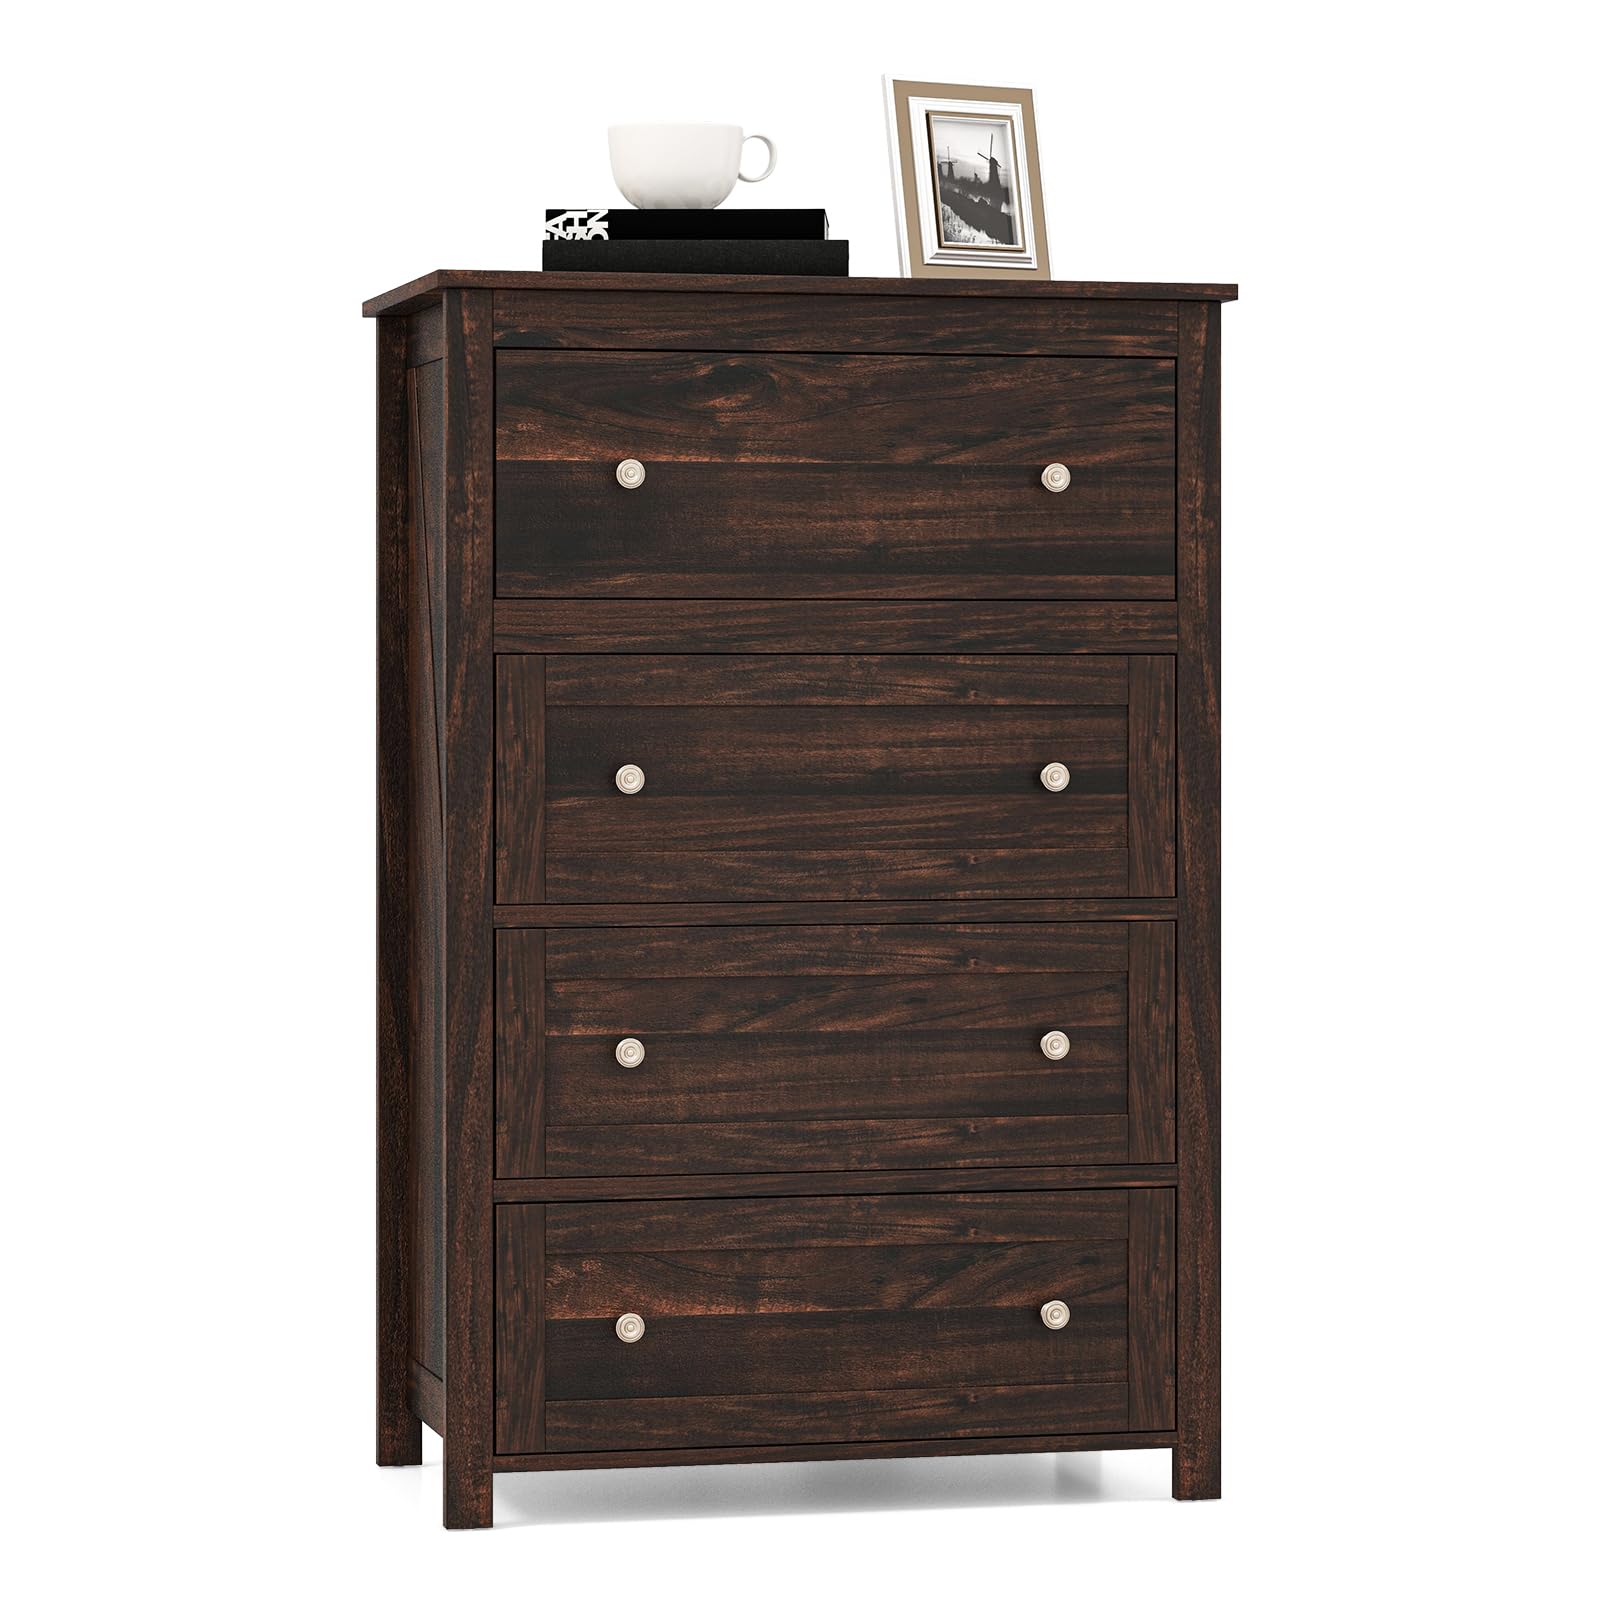 Giantex 4 Drawer Dresser for Bedroom, Drawer of Chest with Anti-tilt Device, Anti-Slip Foot-Pads, Brown